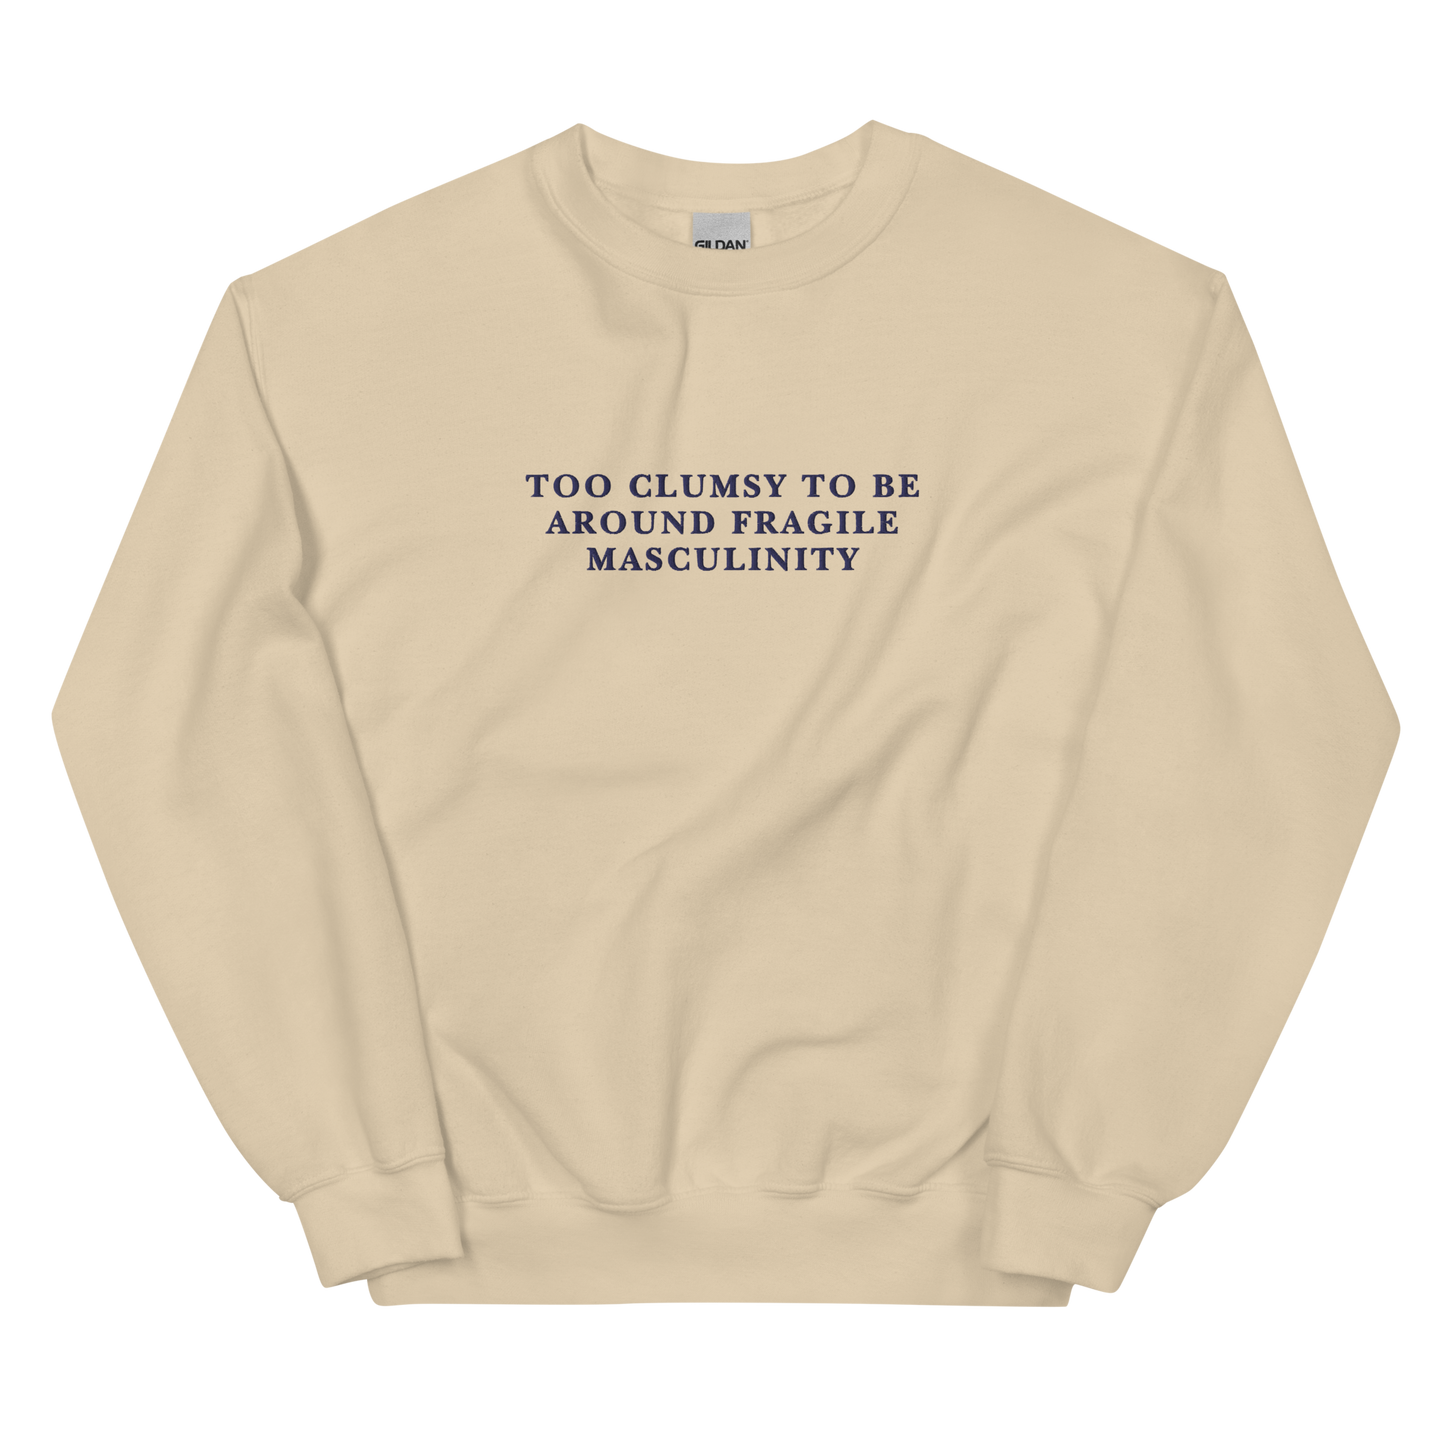 Too Clumsy To Be Around Fragile Masculinity Embroidered Crewneck Sweatshirt